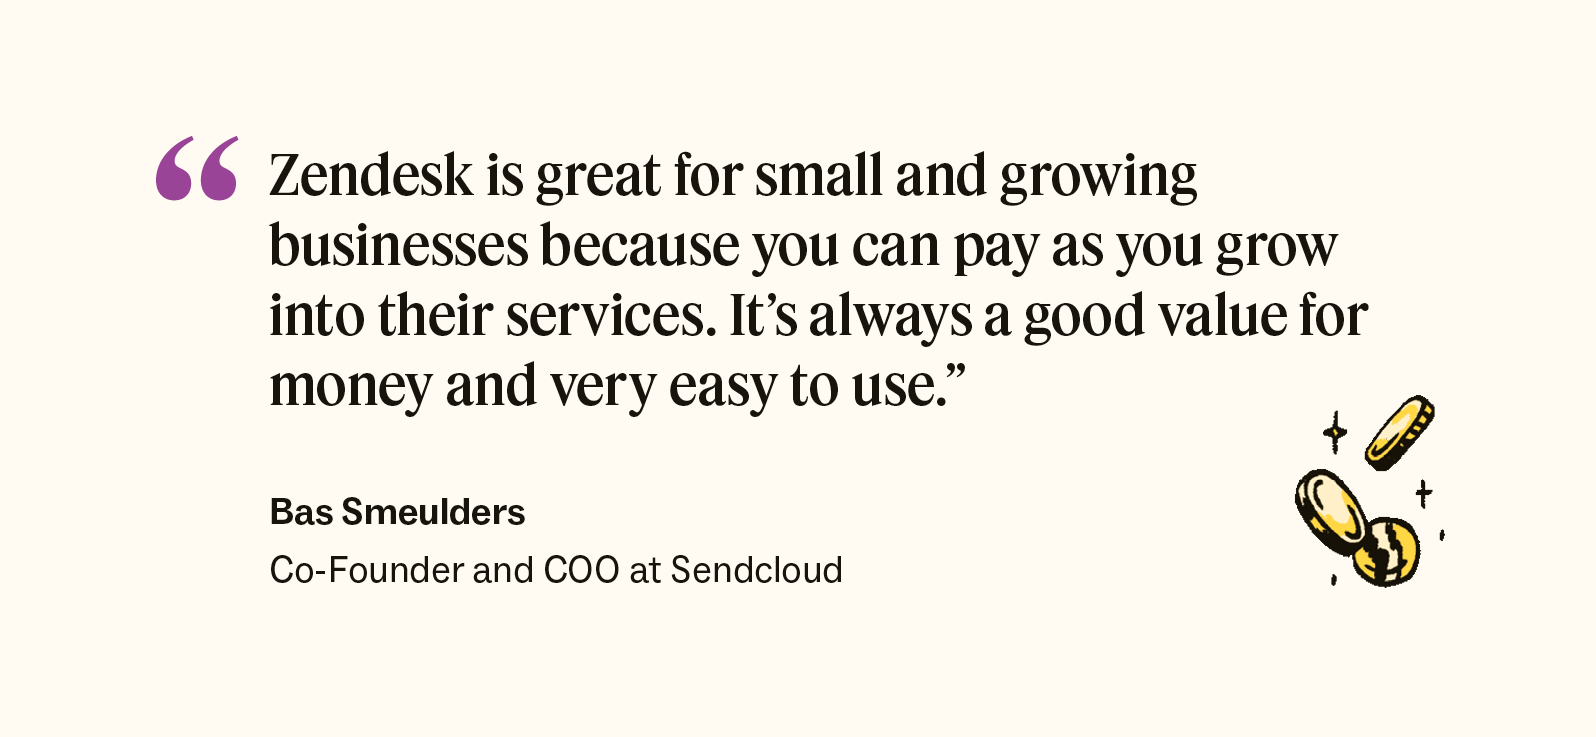 Sendcloud's Co-founder and COO quote